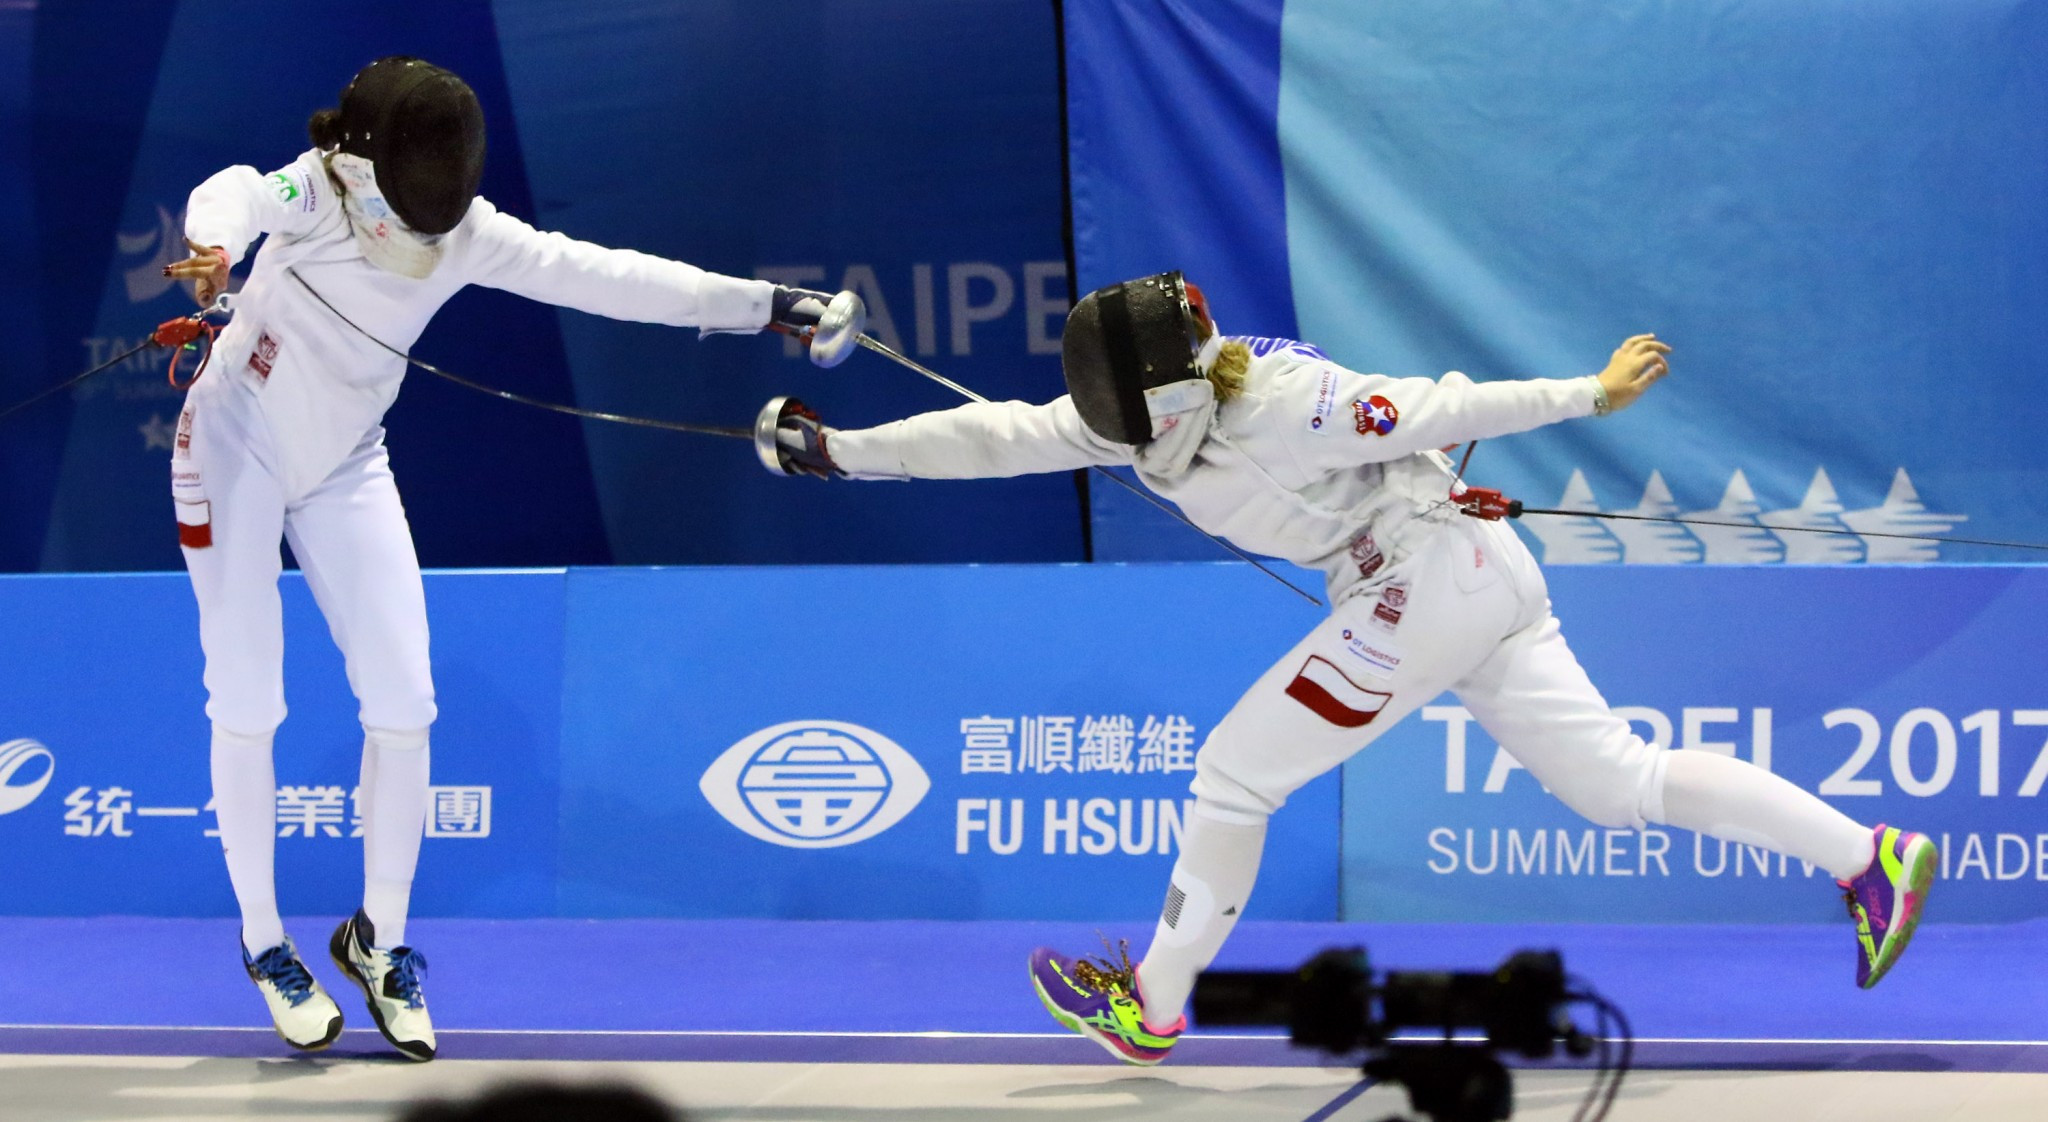 Aleksandra Zamachowska, right, emerged as the victor in an all-Polish gold medal bout in the women's epee competition ©Taipei 2017